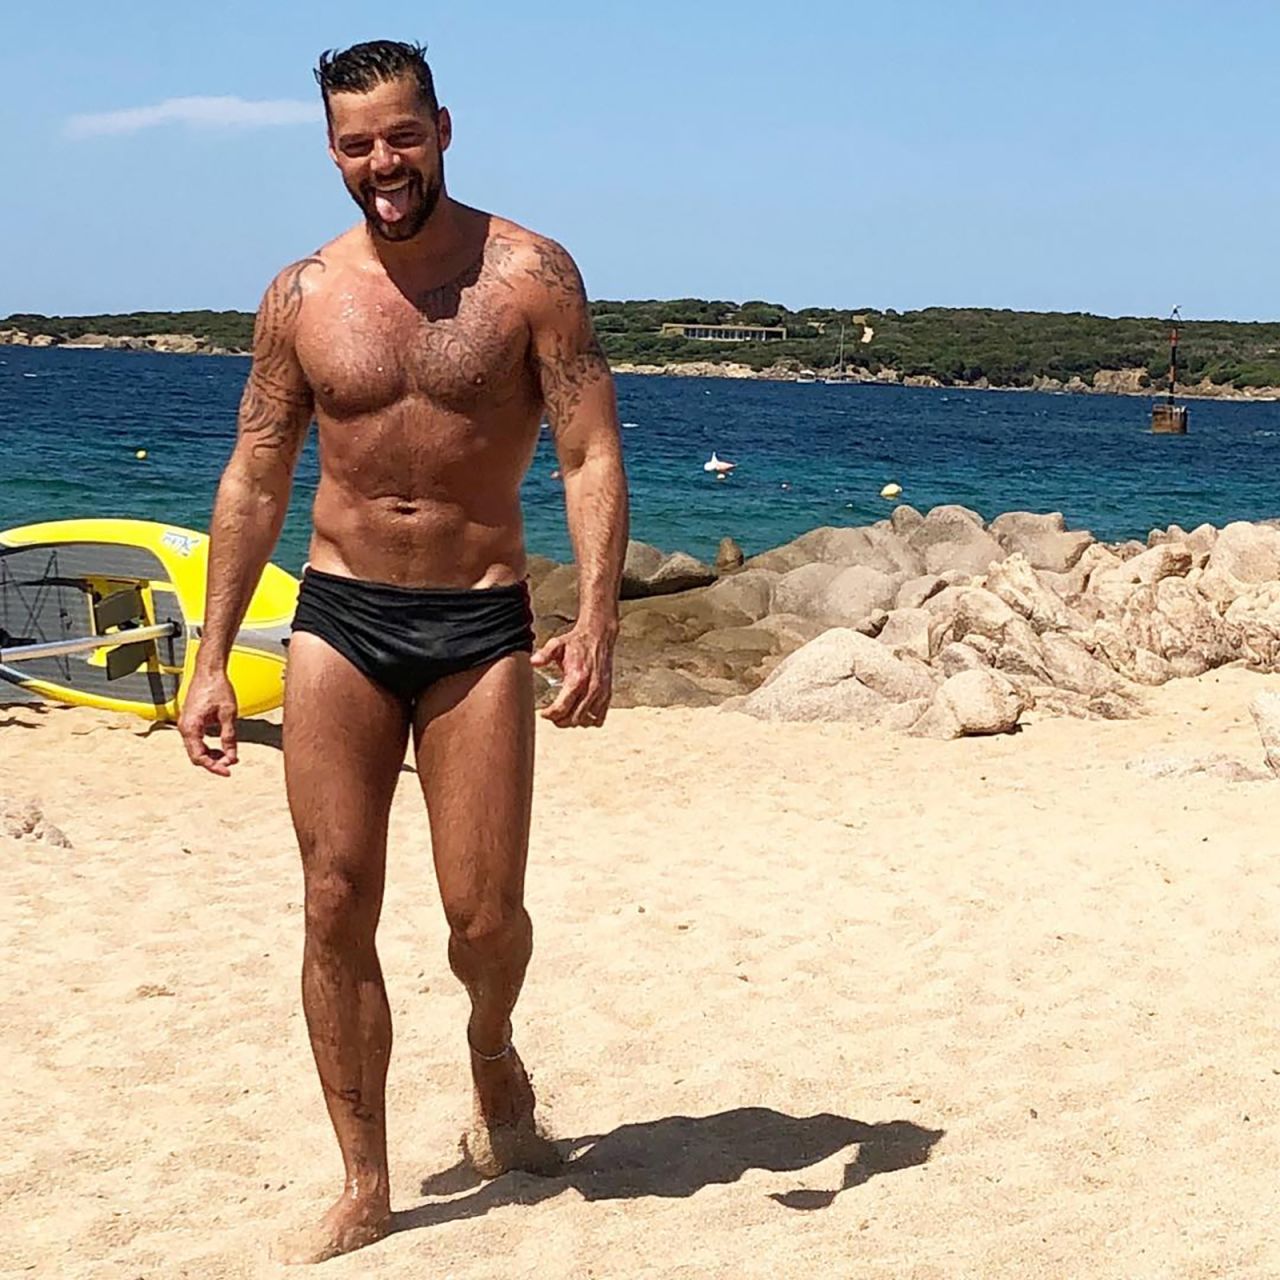 Singer Ricky Martin is a fan of the swimming brief, posting pictures of himself in the style on his social media.